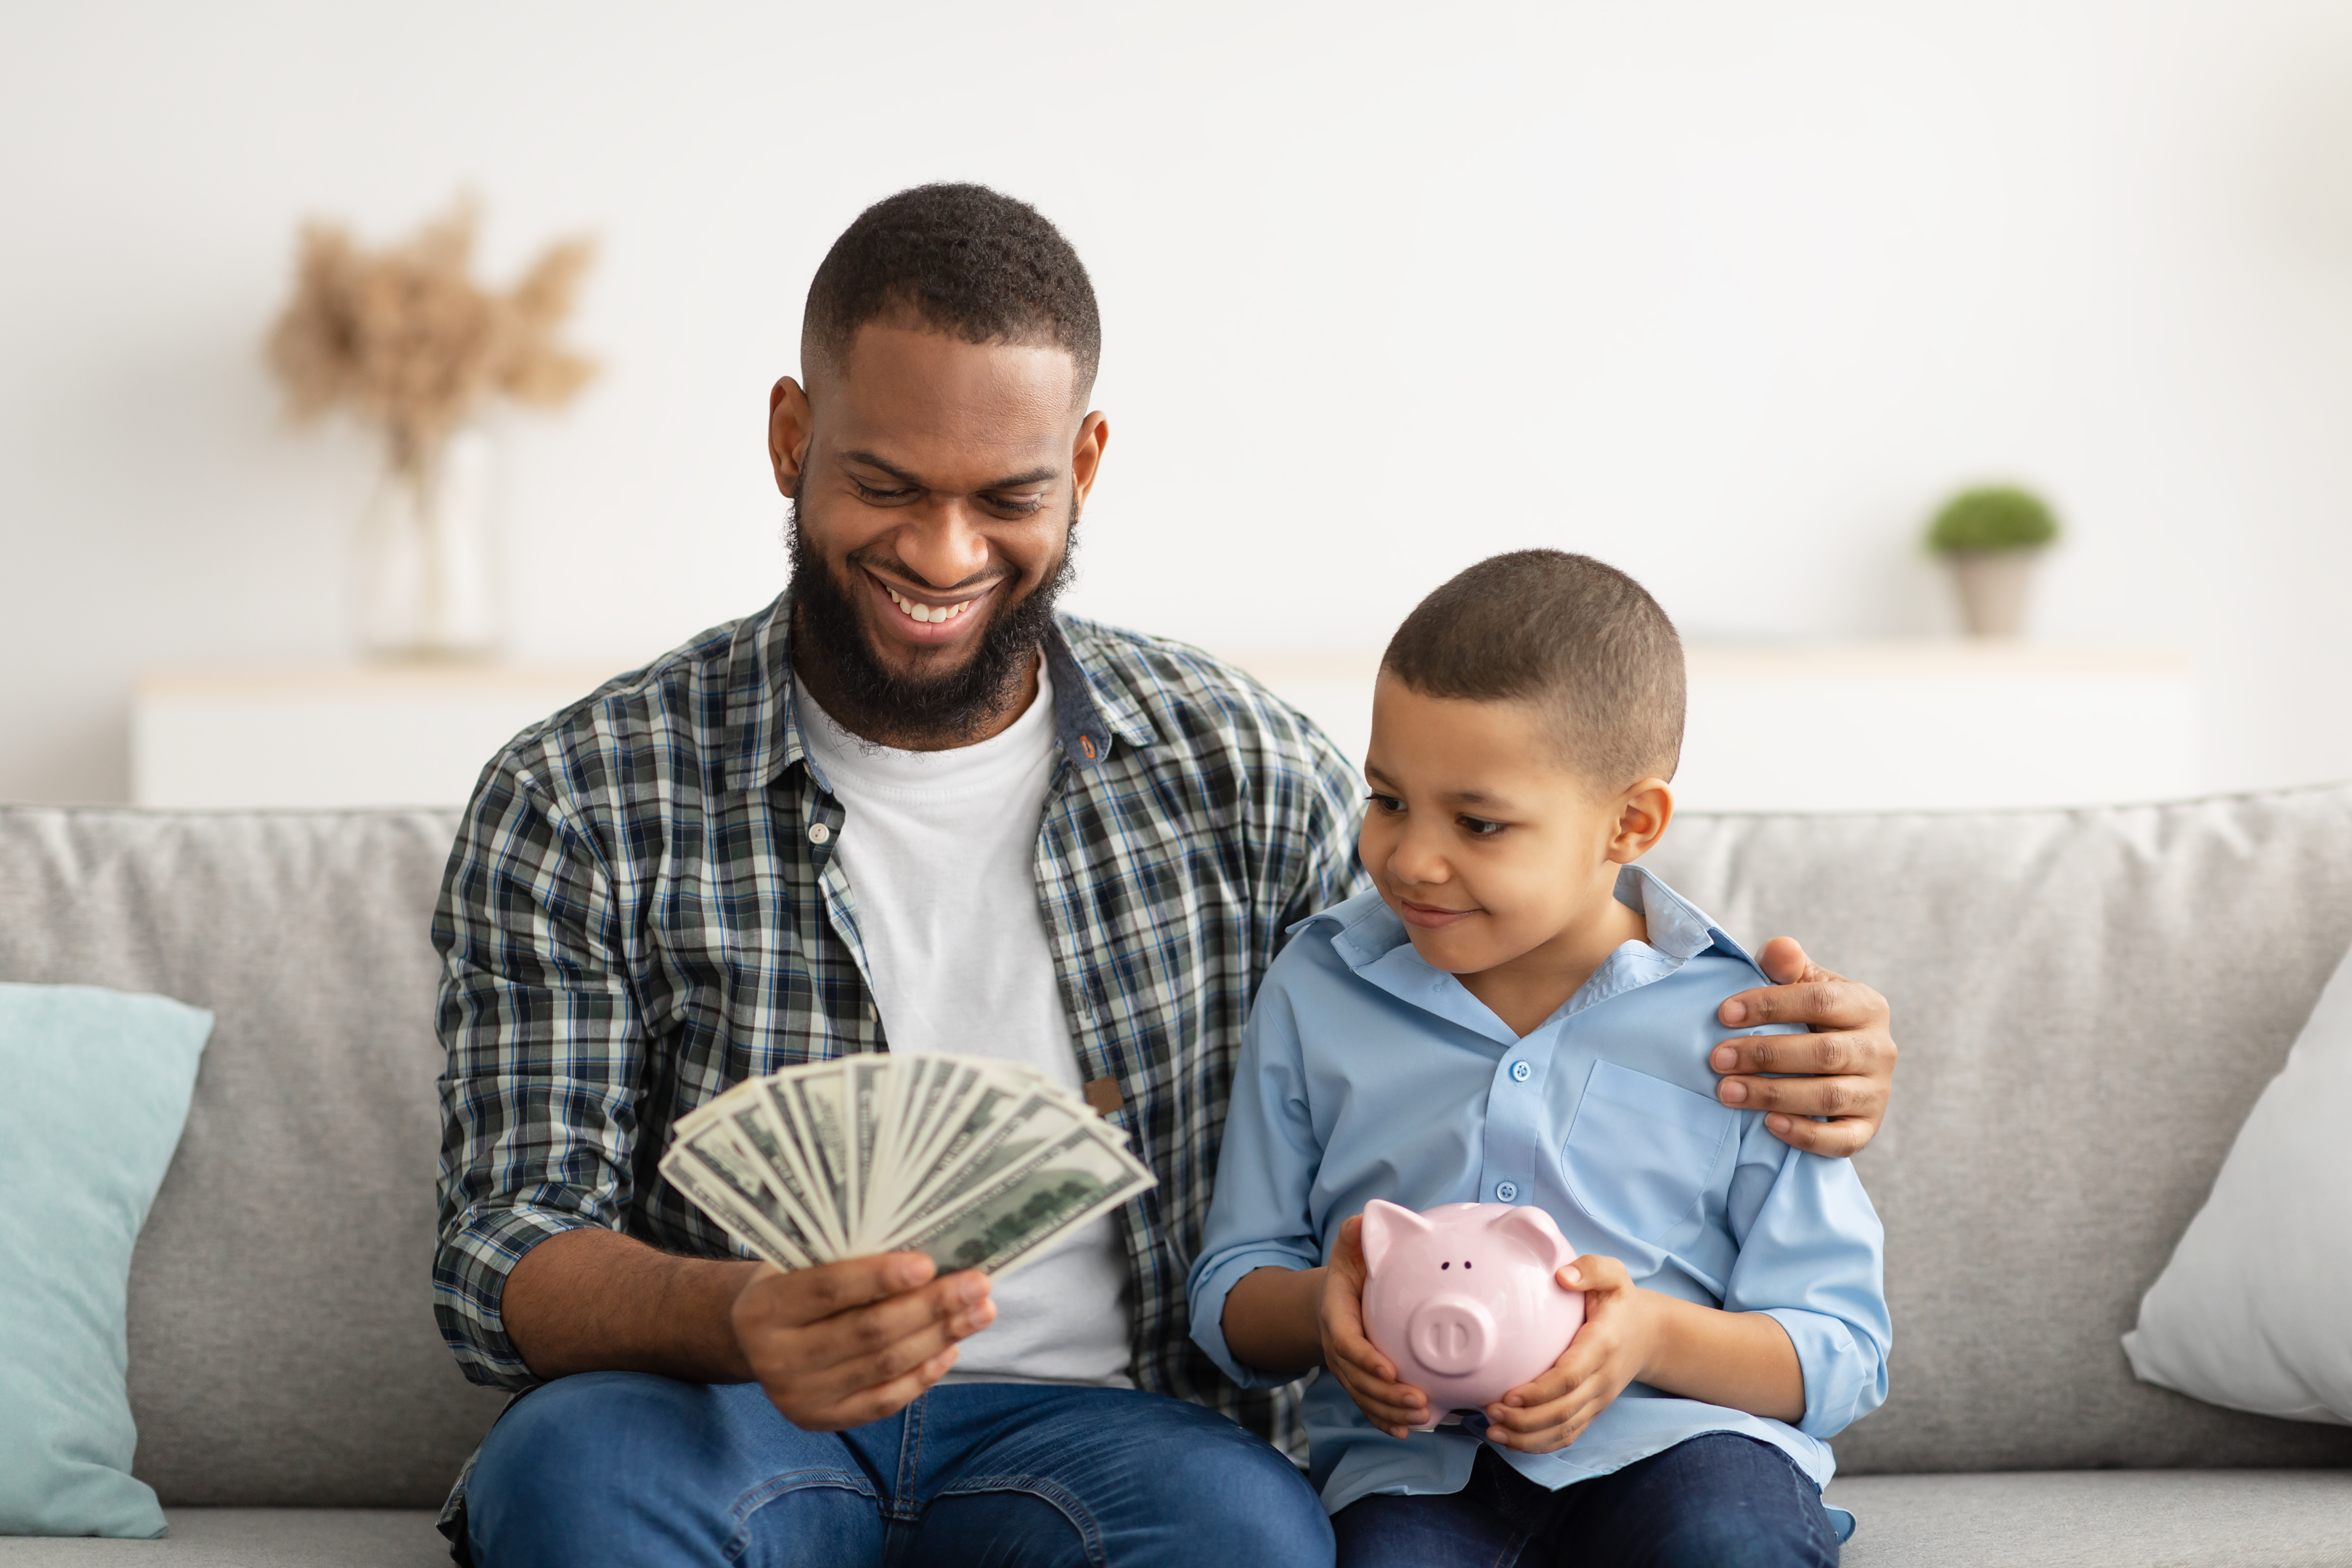 "Empowering the next generation: A father teaches his son about the financial stability and opportunities that come with trust fund benefits."